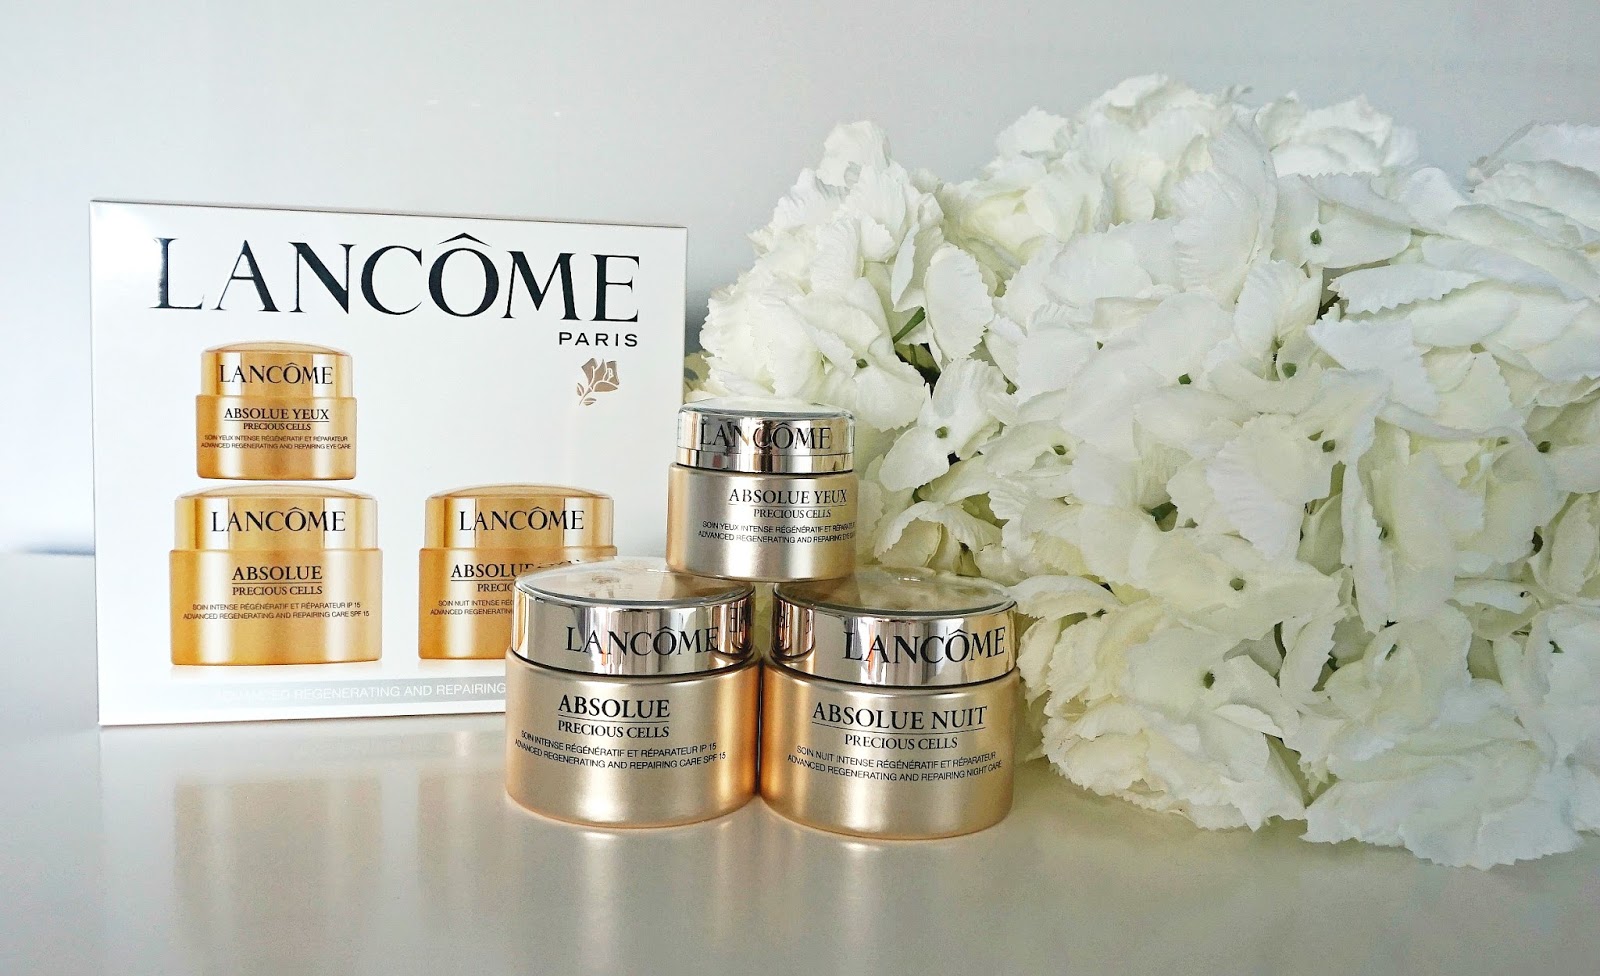 Lancome Absolue Precious Cells Power Of 3 Set Review